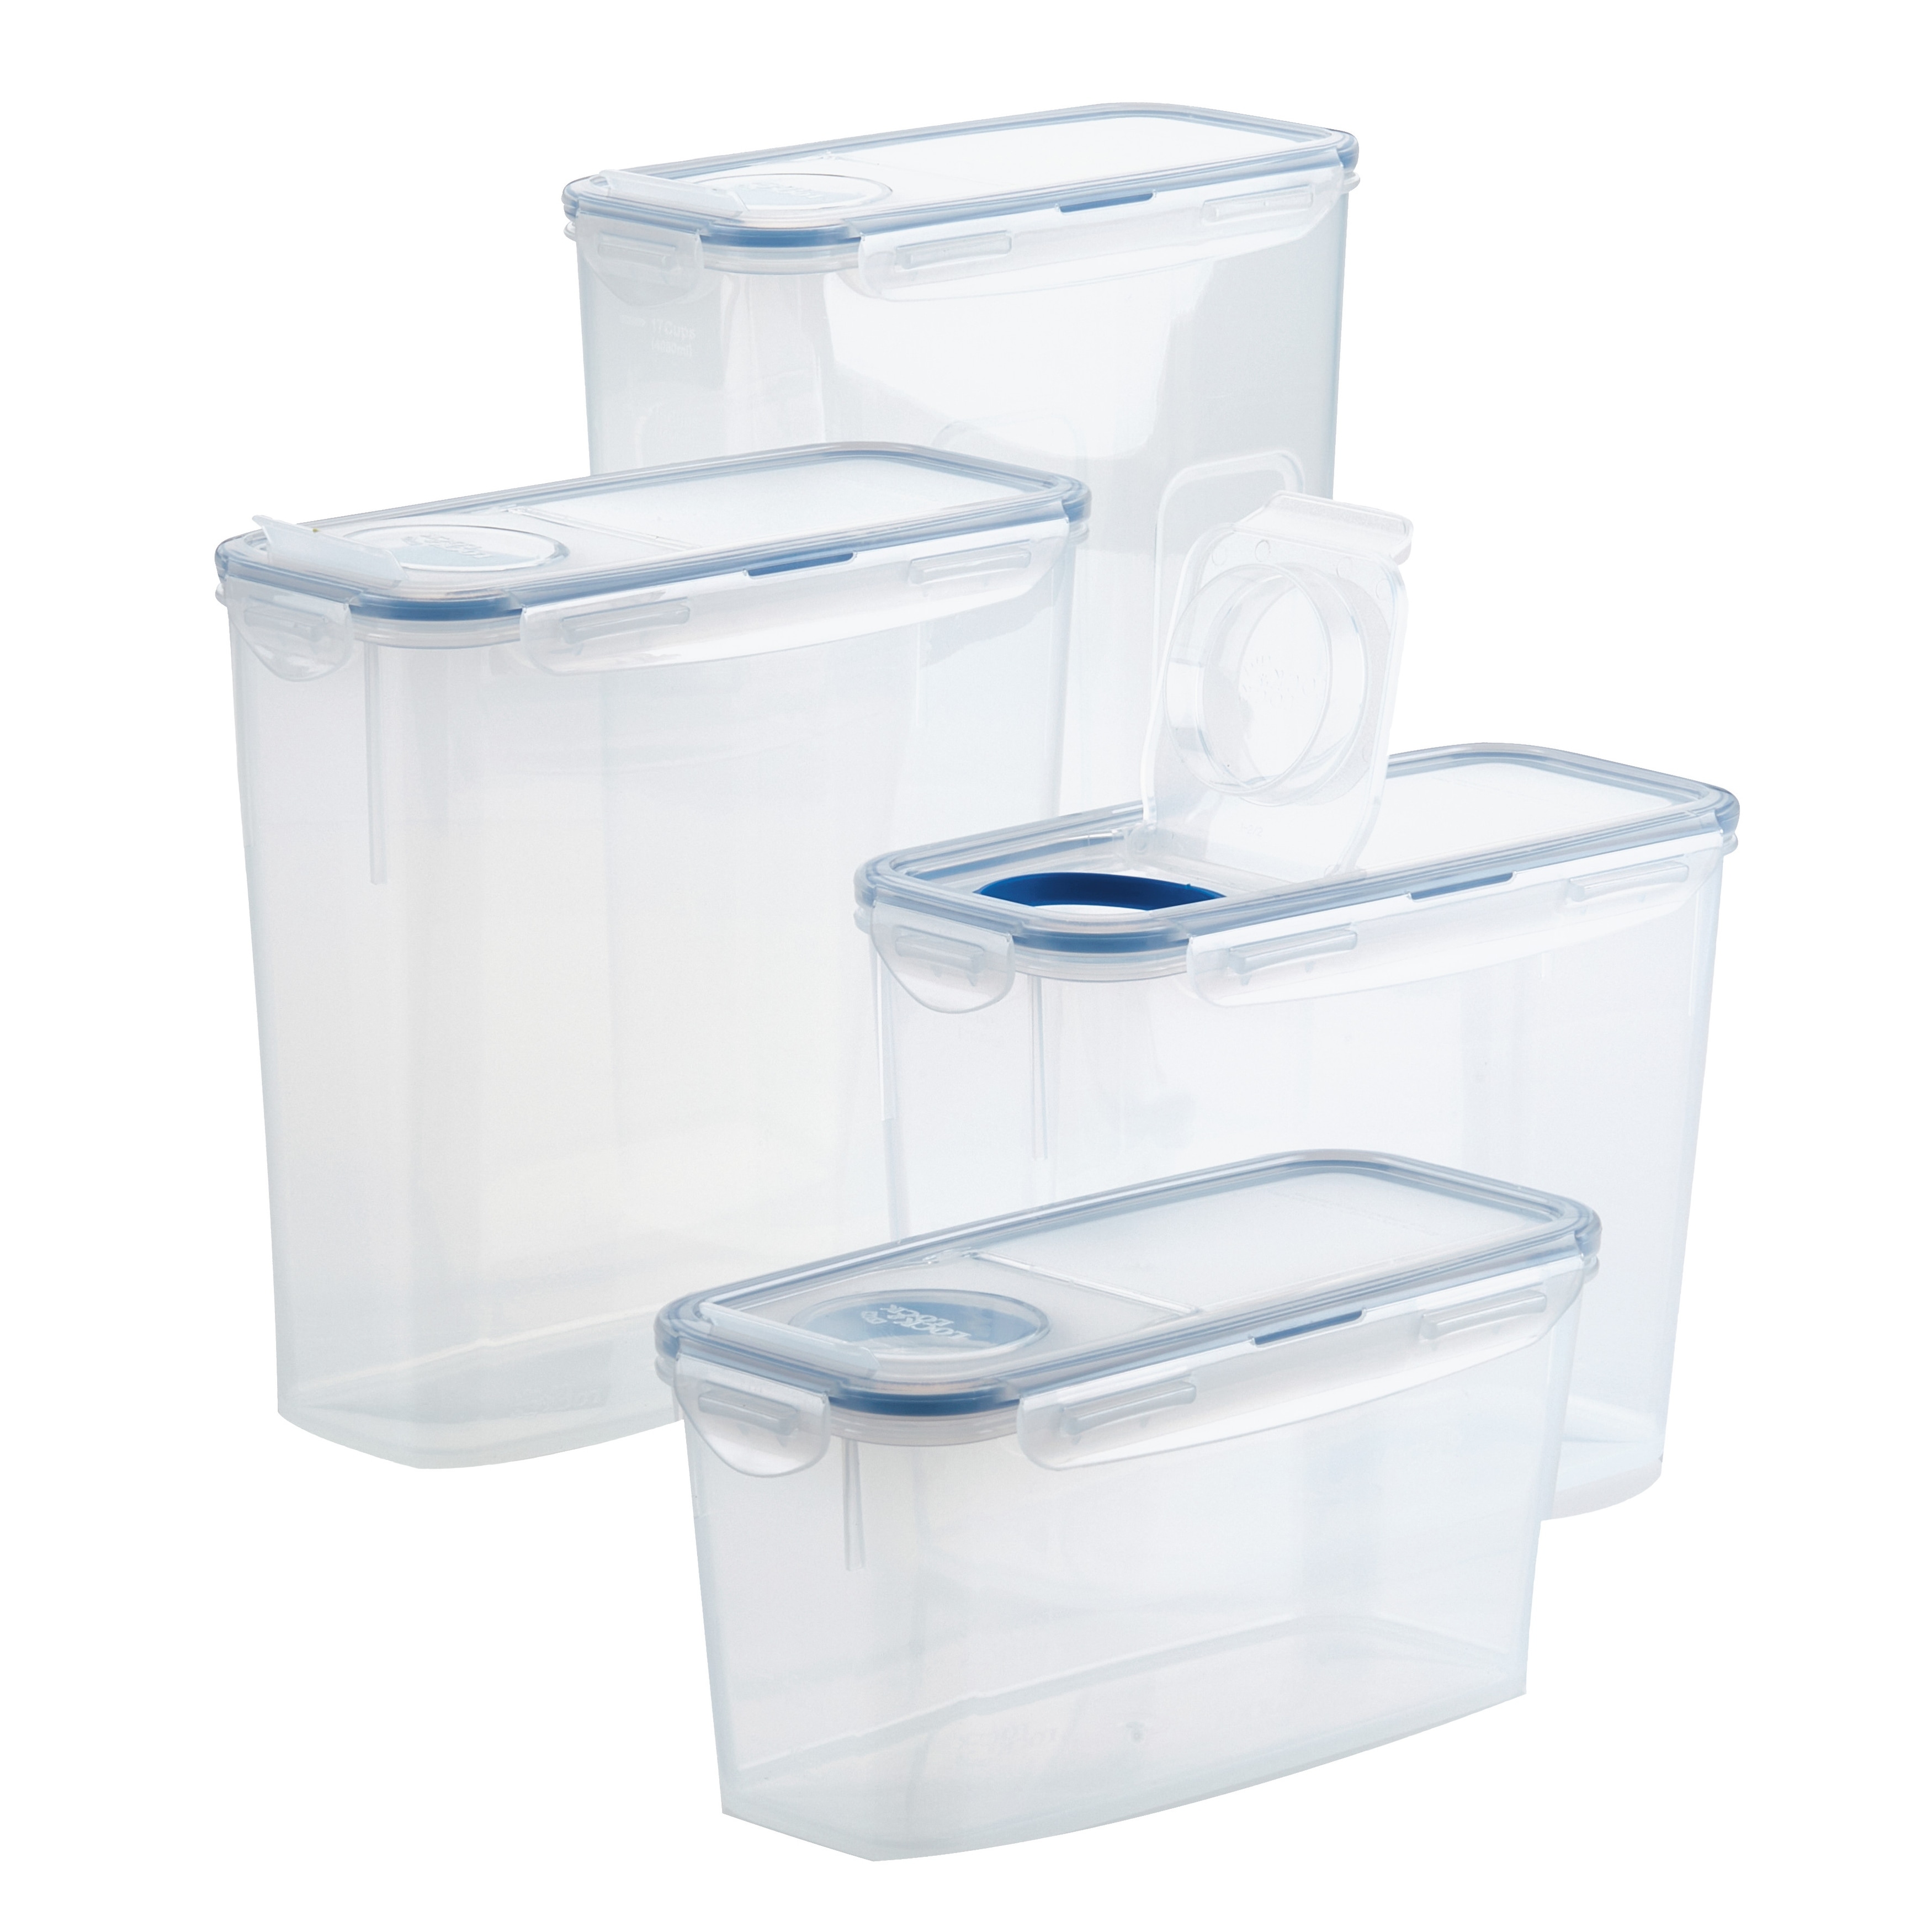 https://ak1.ostkcdn.com/images/products/is/images/direct/2293918bf7817aefb00a828b90c3cbd5d607ceda/LocknLock-Pantry-Food-Storage-Container-Set%2C-10-Piece.jpg